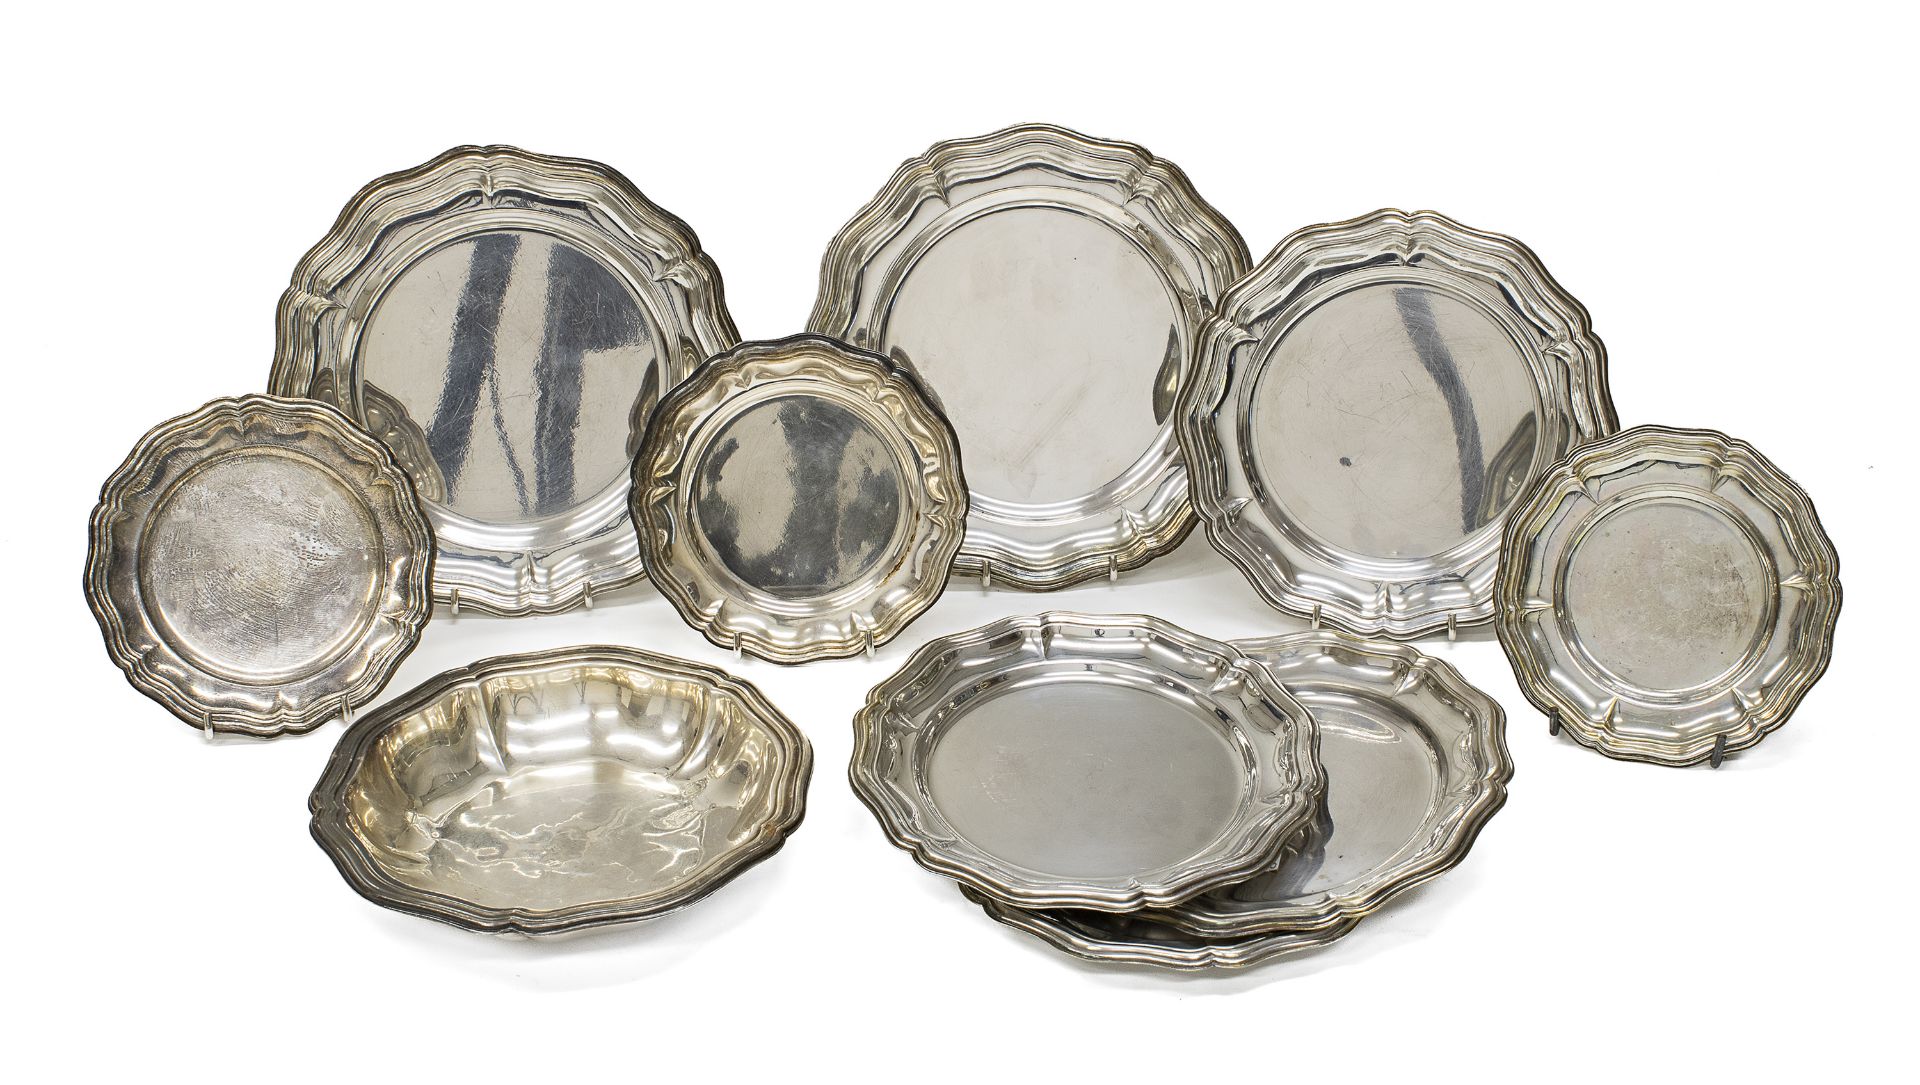 SILVER-PLATED BOWL AND NINE SAUCERS 20TH CENTURY